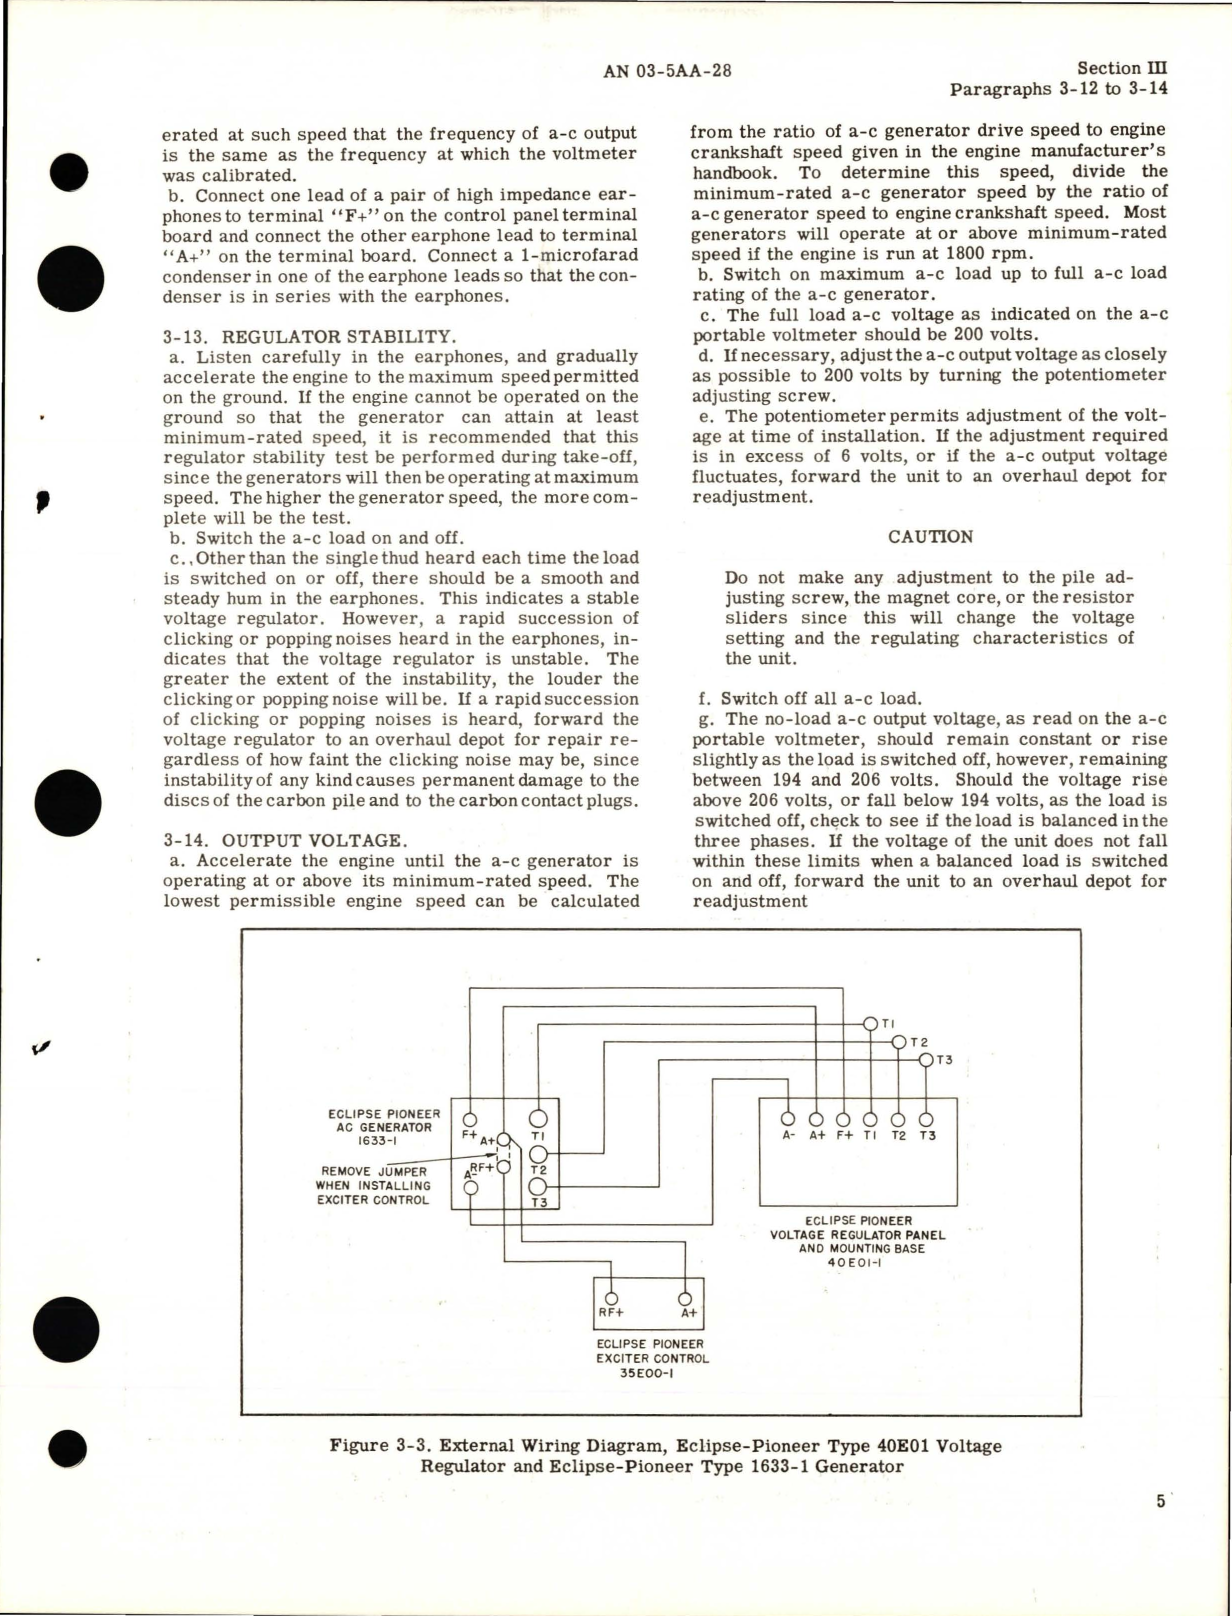 Sample page 9 from AirCorps Library document: Operation, Service, and Overhaul Instructions with Illustrated Parts Breakdown for Voltage Regulator Panel and Mounting Base Assembly 